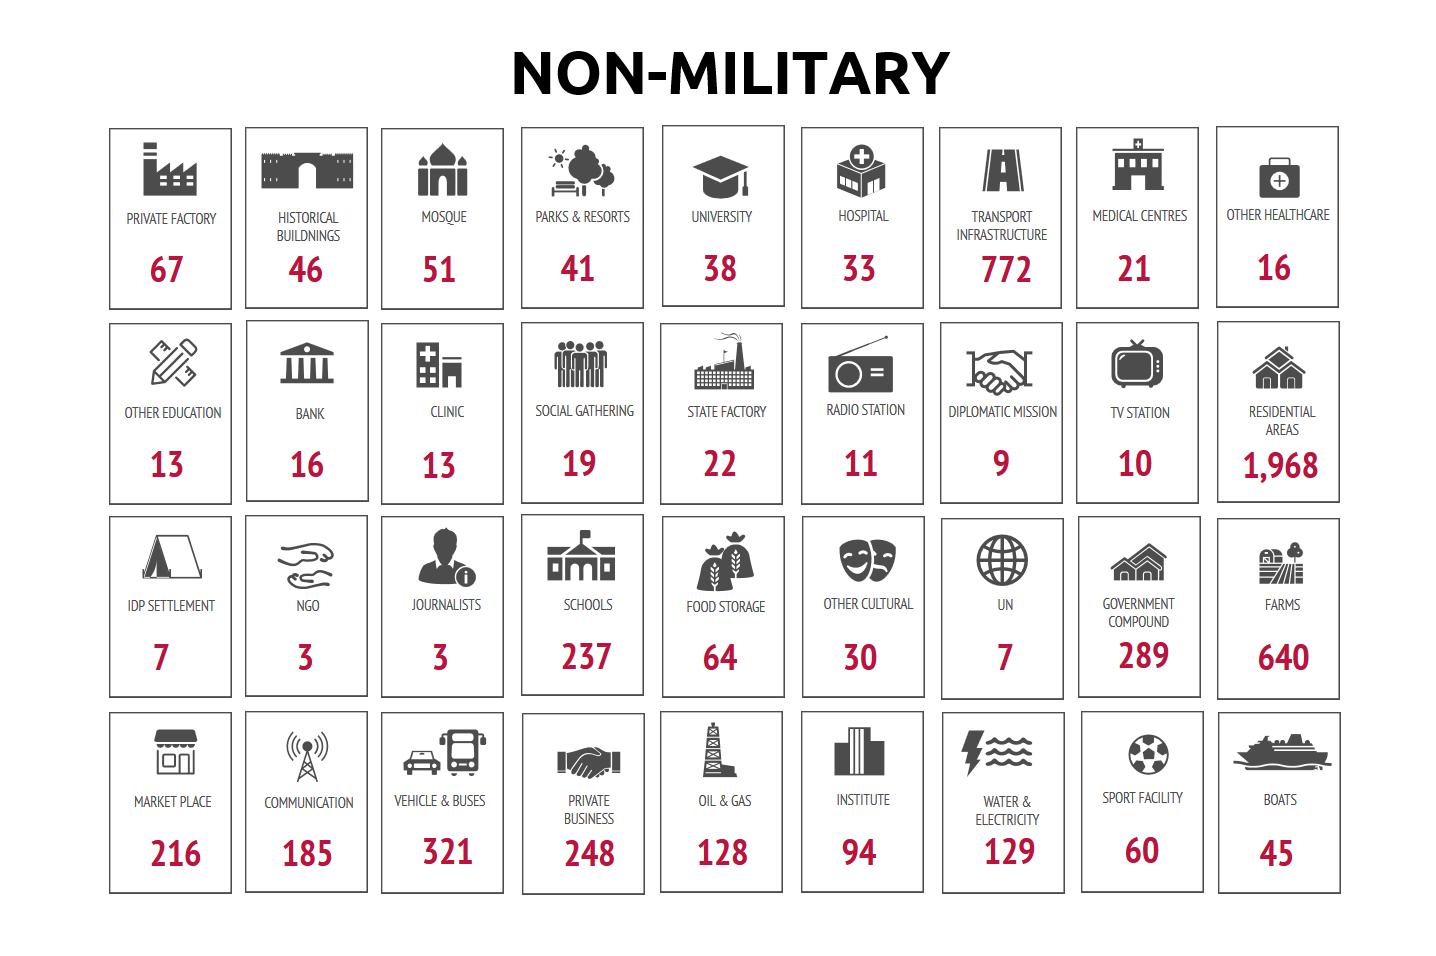 yemen-data-project-non-military-targets-march-2019.png